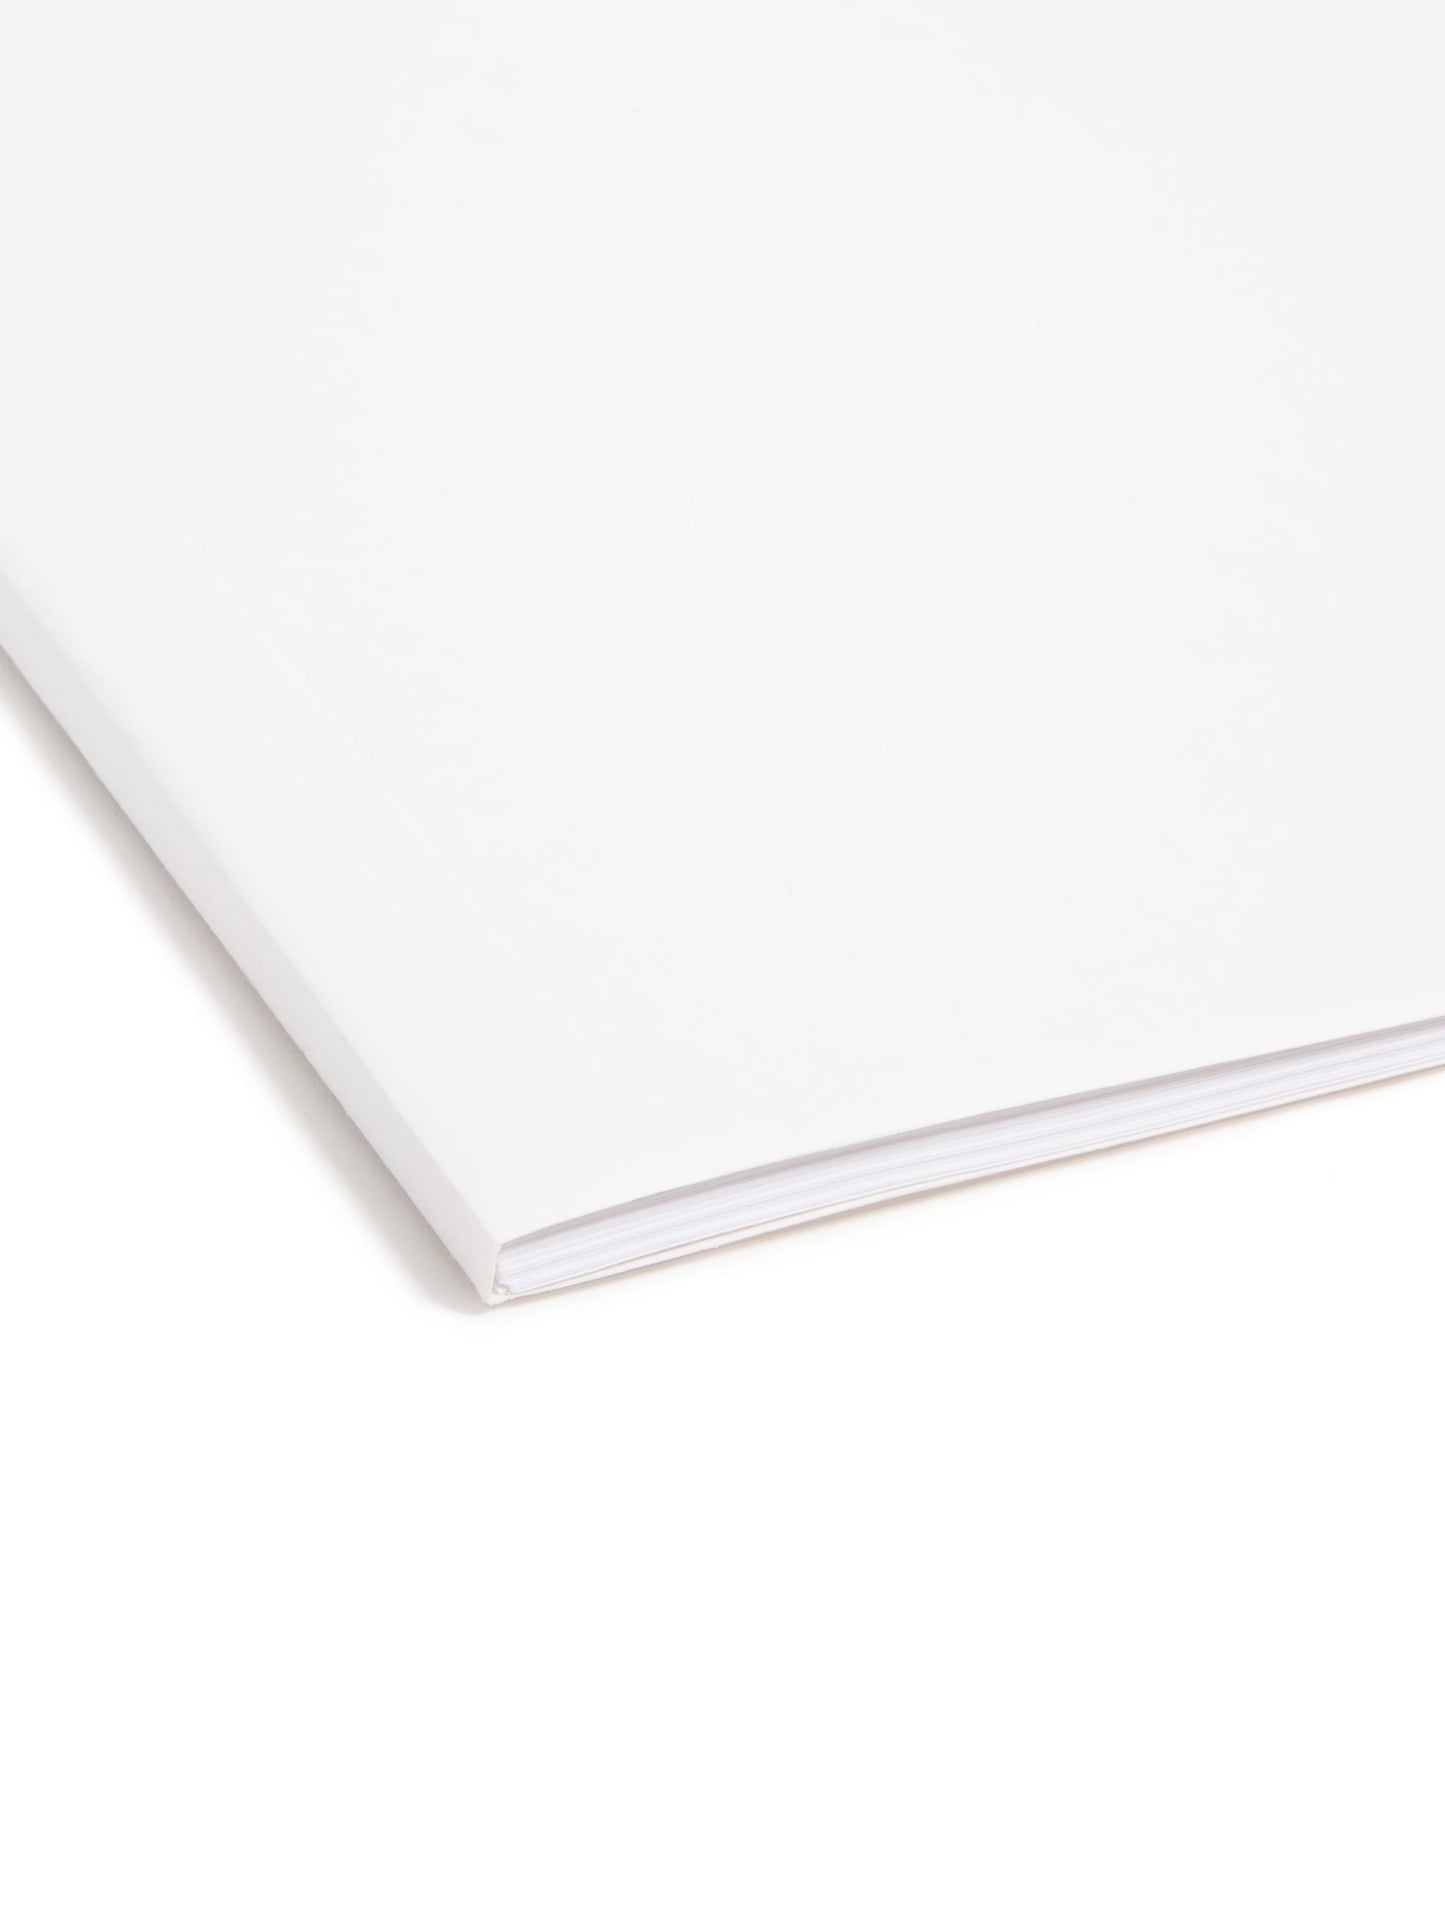 FasTab® Hanging File Folders, Straight-Cut Tab, White Color, Letter Size, Set of 20, 086486641029